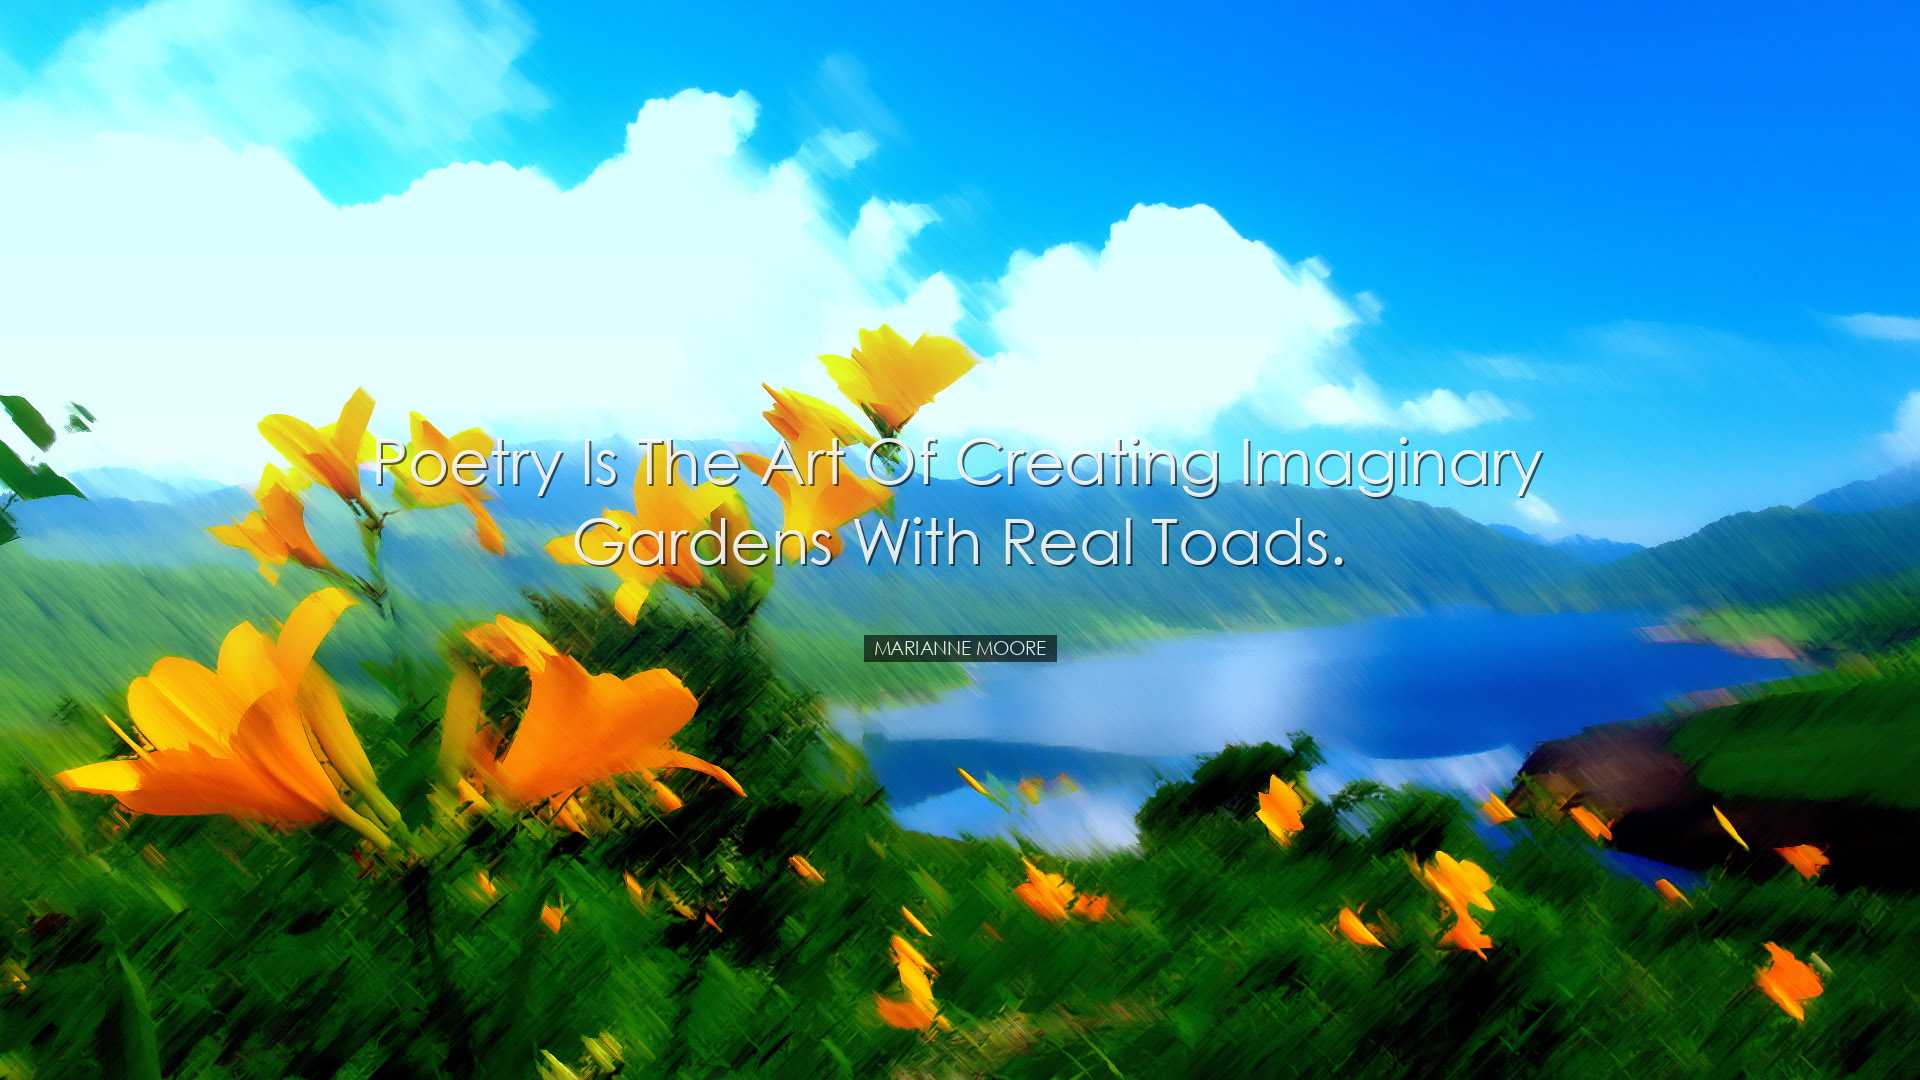 Poetry is the art of creating imaginary gardens with real toads. -